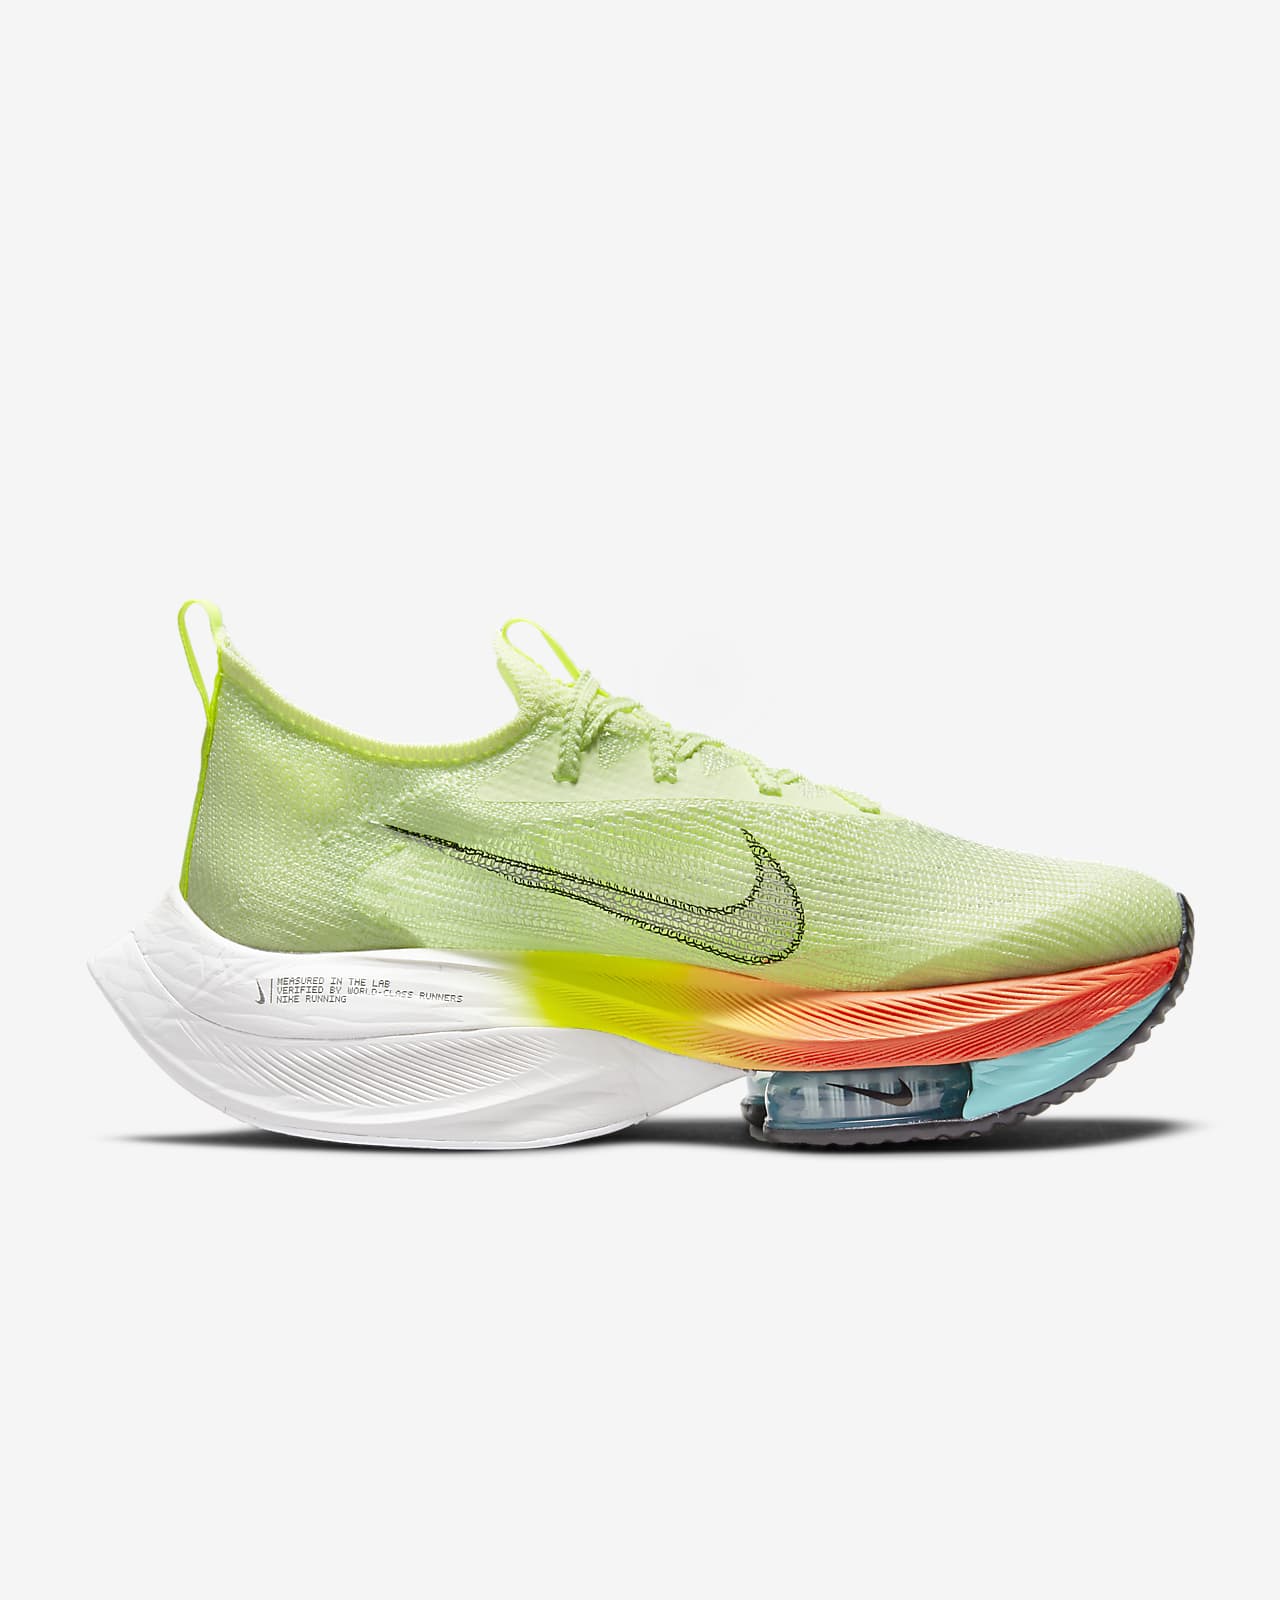 Nike Air Zoom Alphafly NEXT% Flyknit Women's Road Racing Shoes. Nike AE